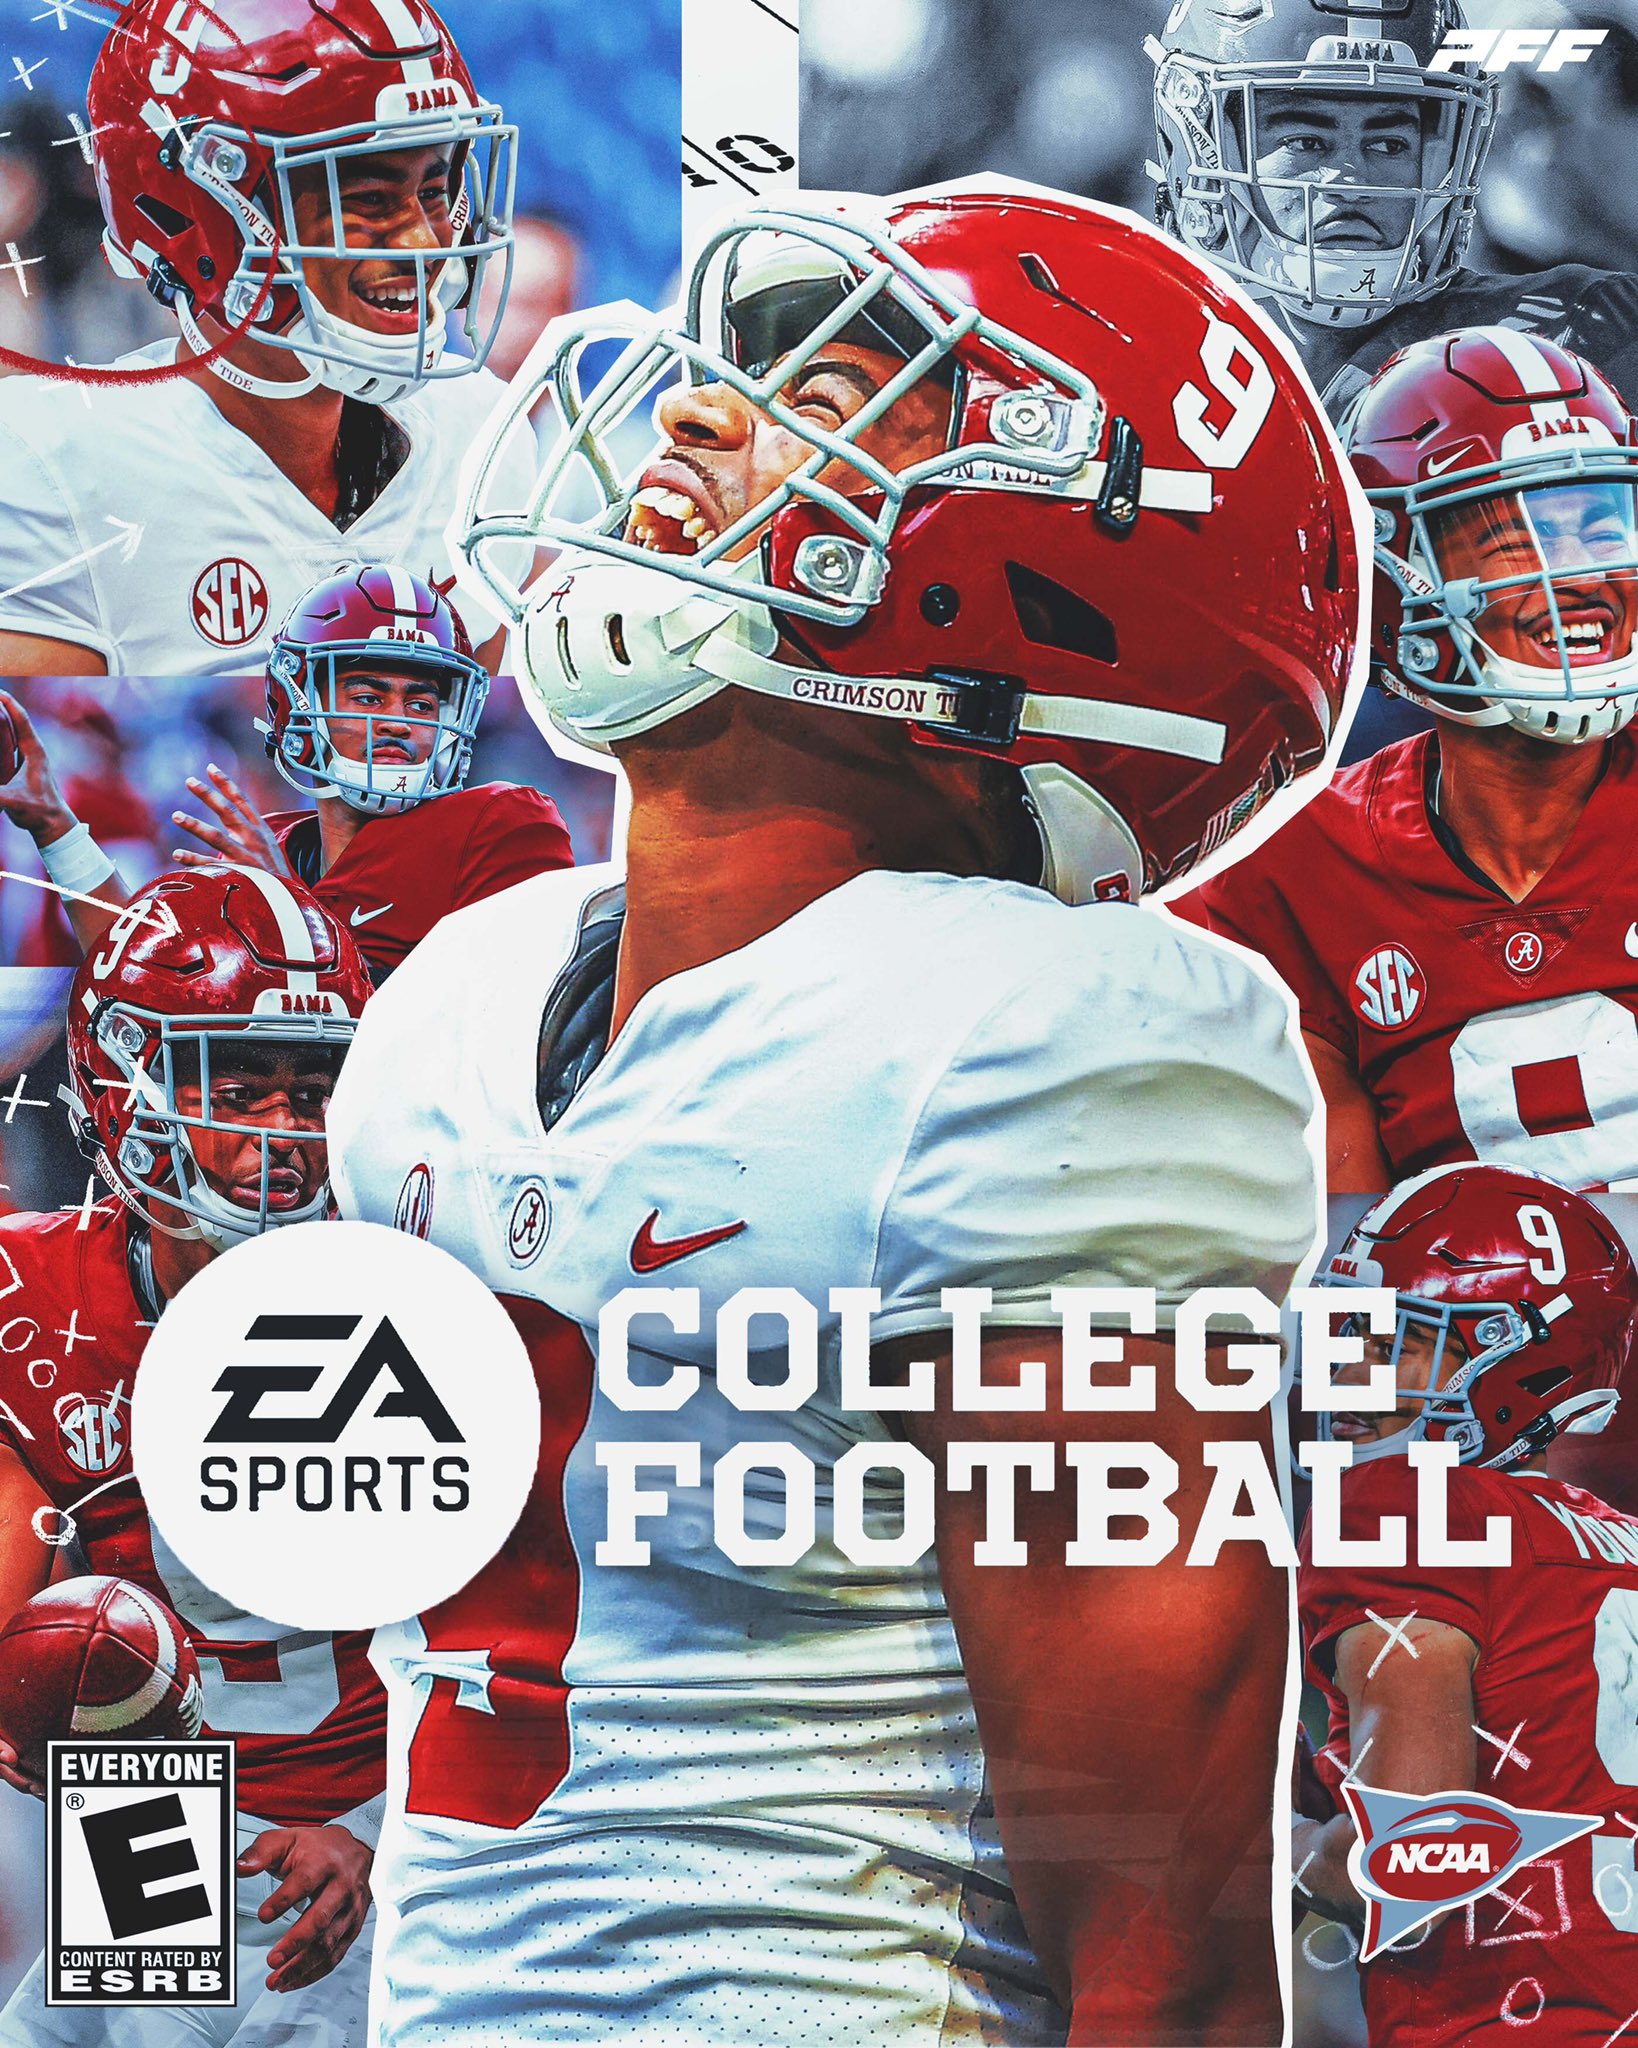 PFF College on Twitter: Football 24 will include Road to Glory and Dynasty Mode, @247Sports. https://t.co/7GTfDWAHWc" / Twitter